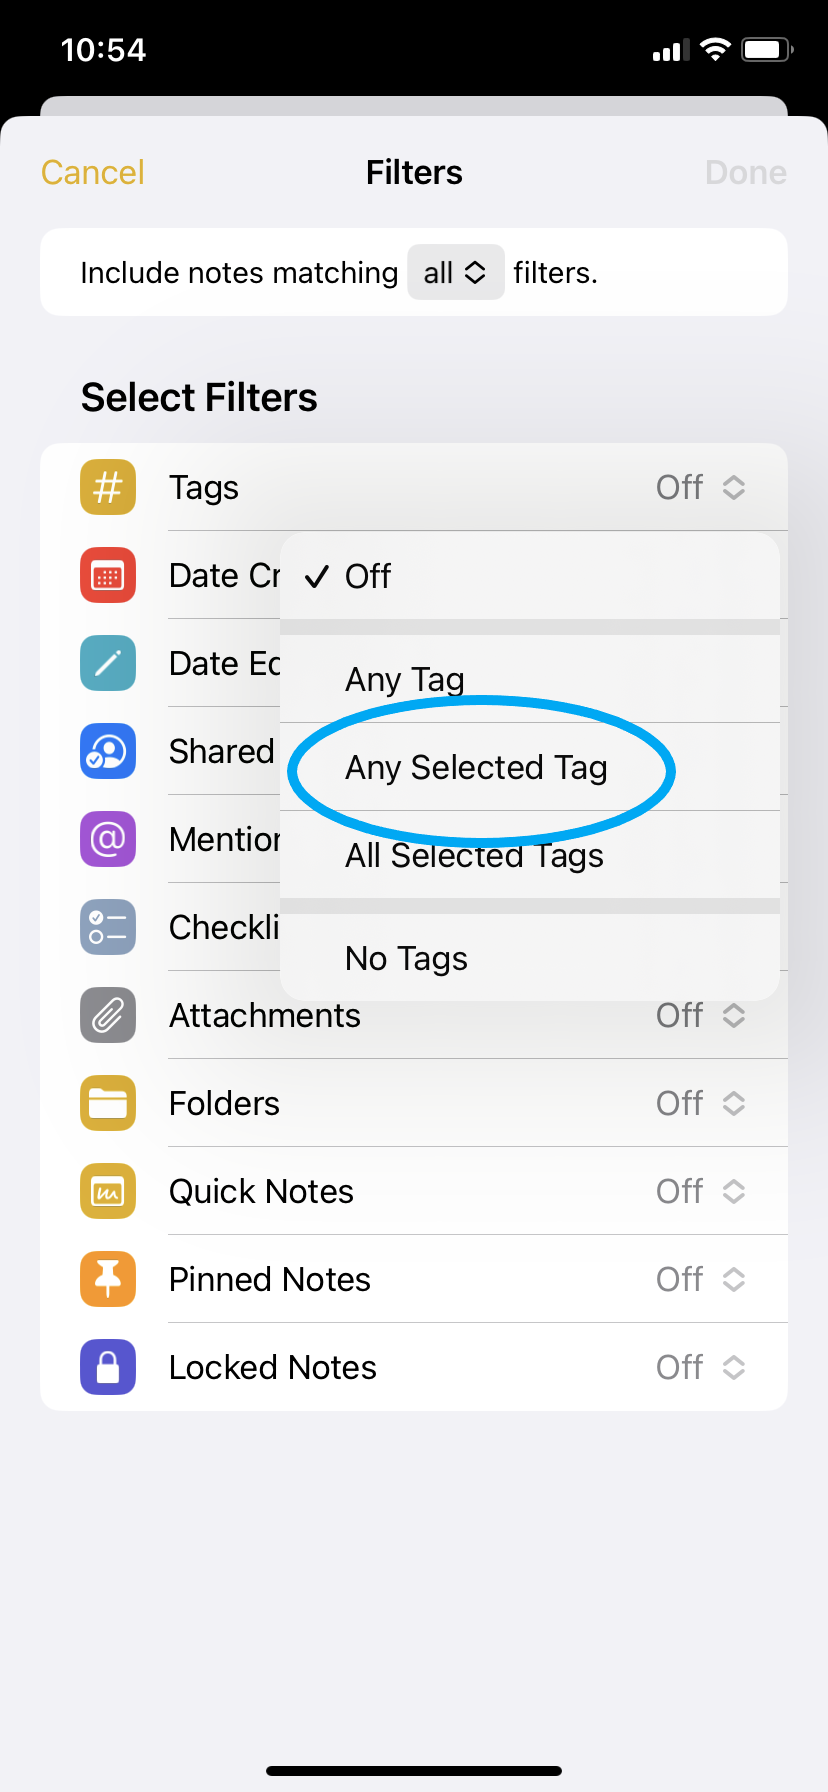 How to use Smart Folders in the iOS Notes app